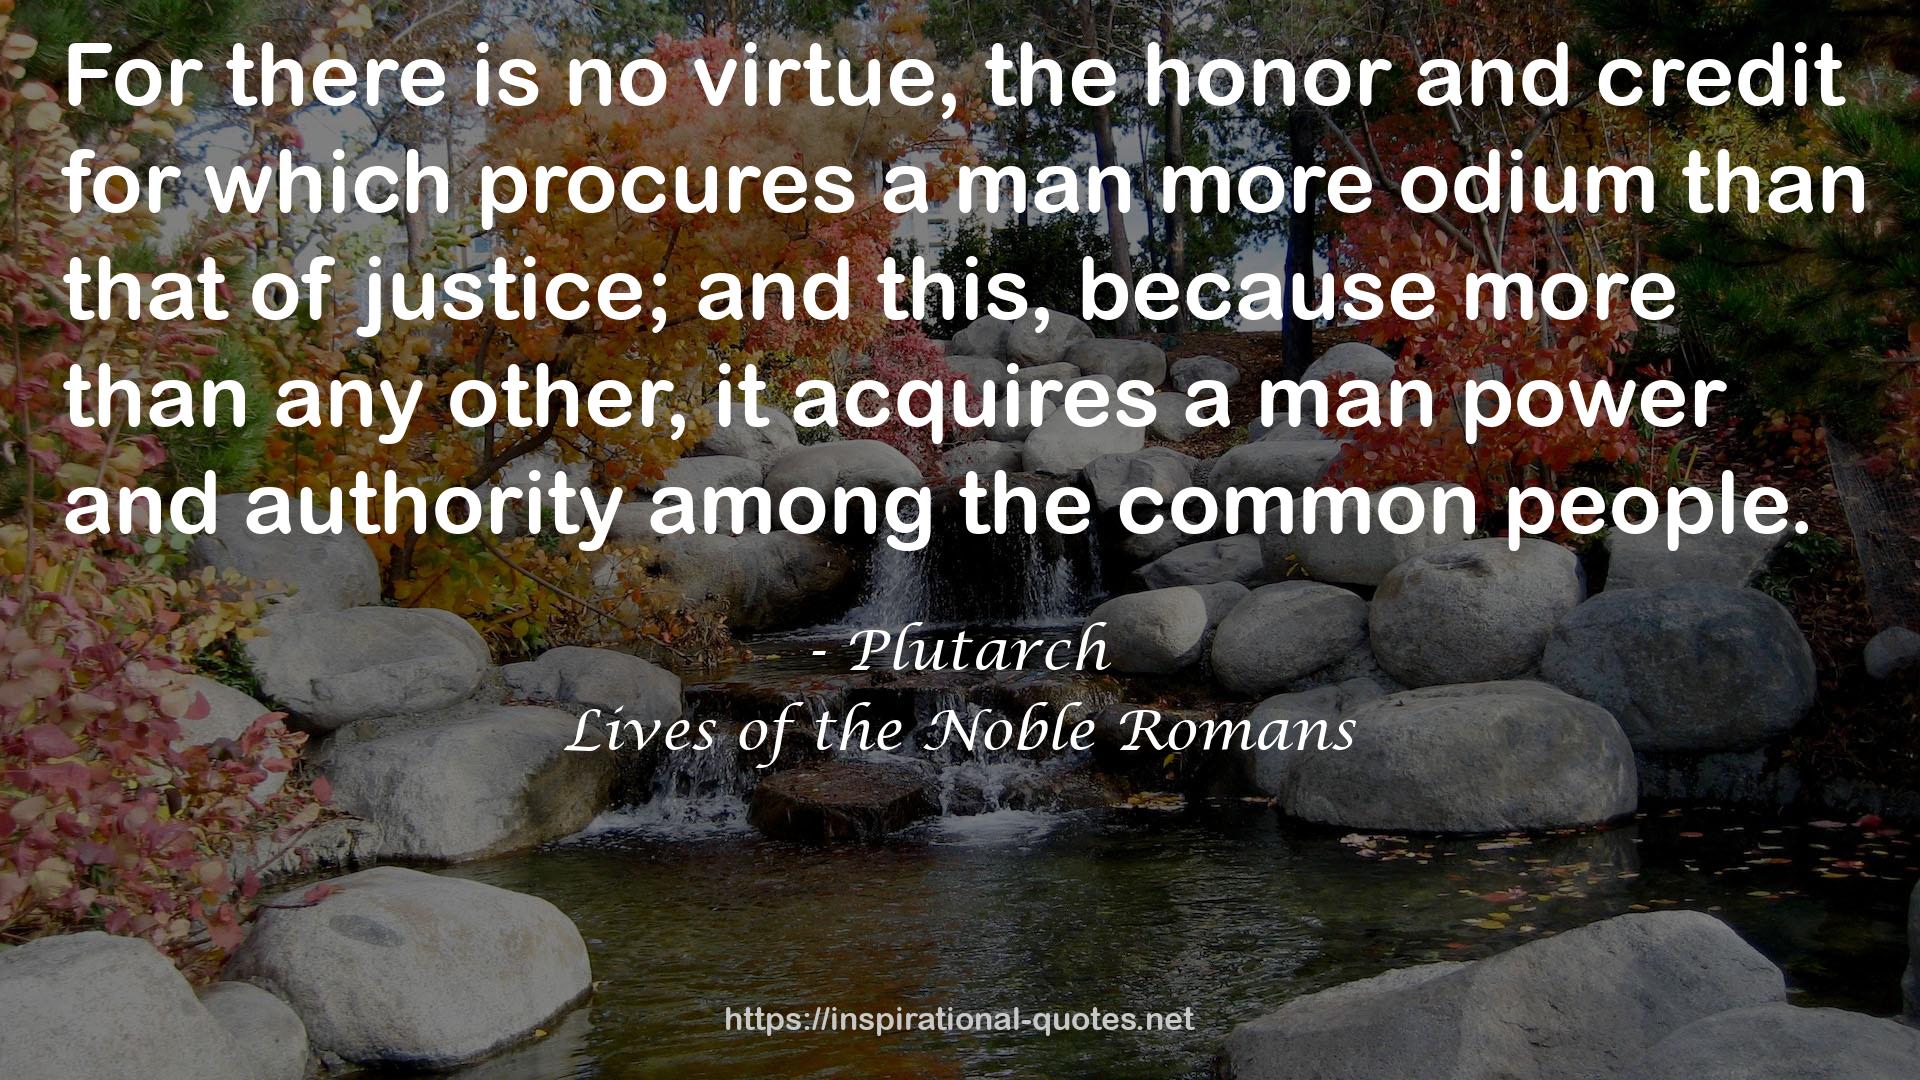 Lives of the Noble Romans QUOTES